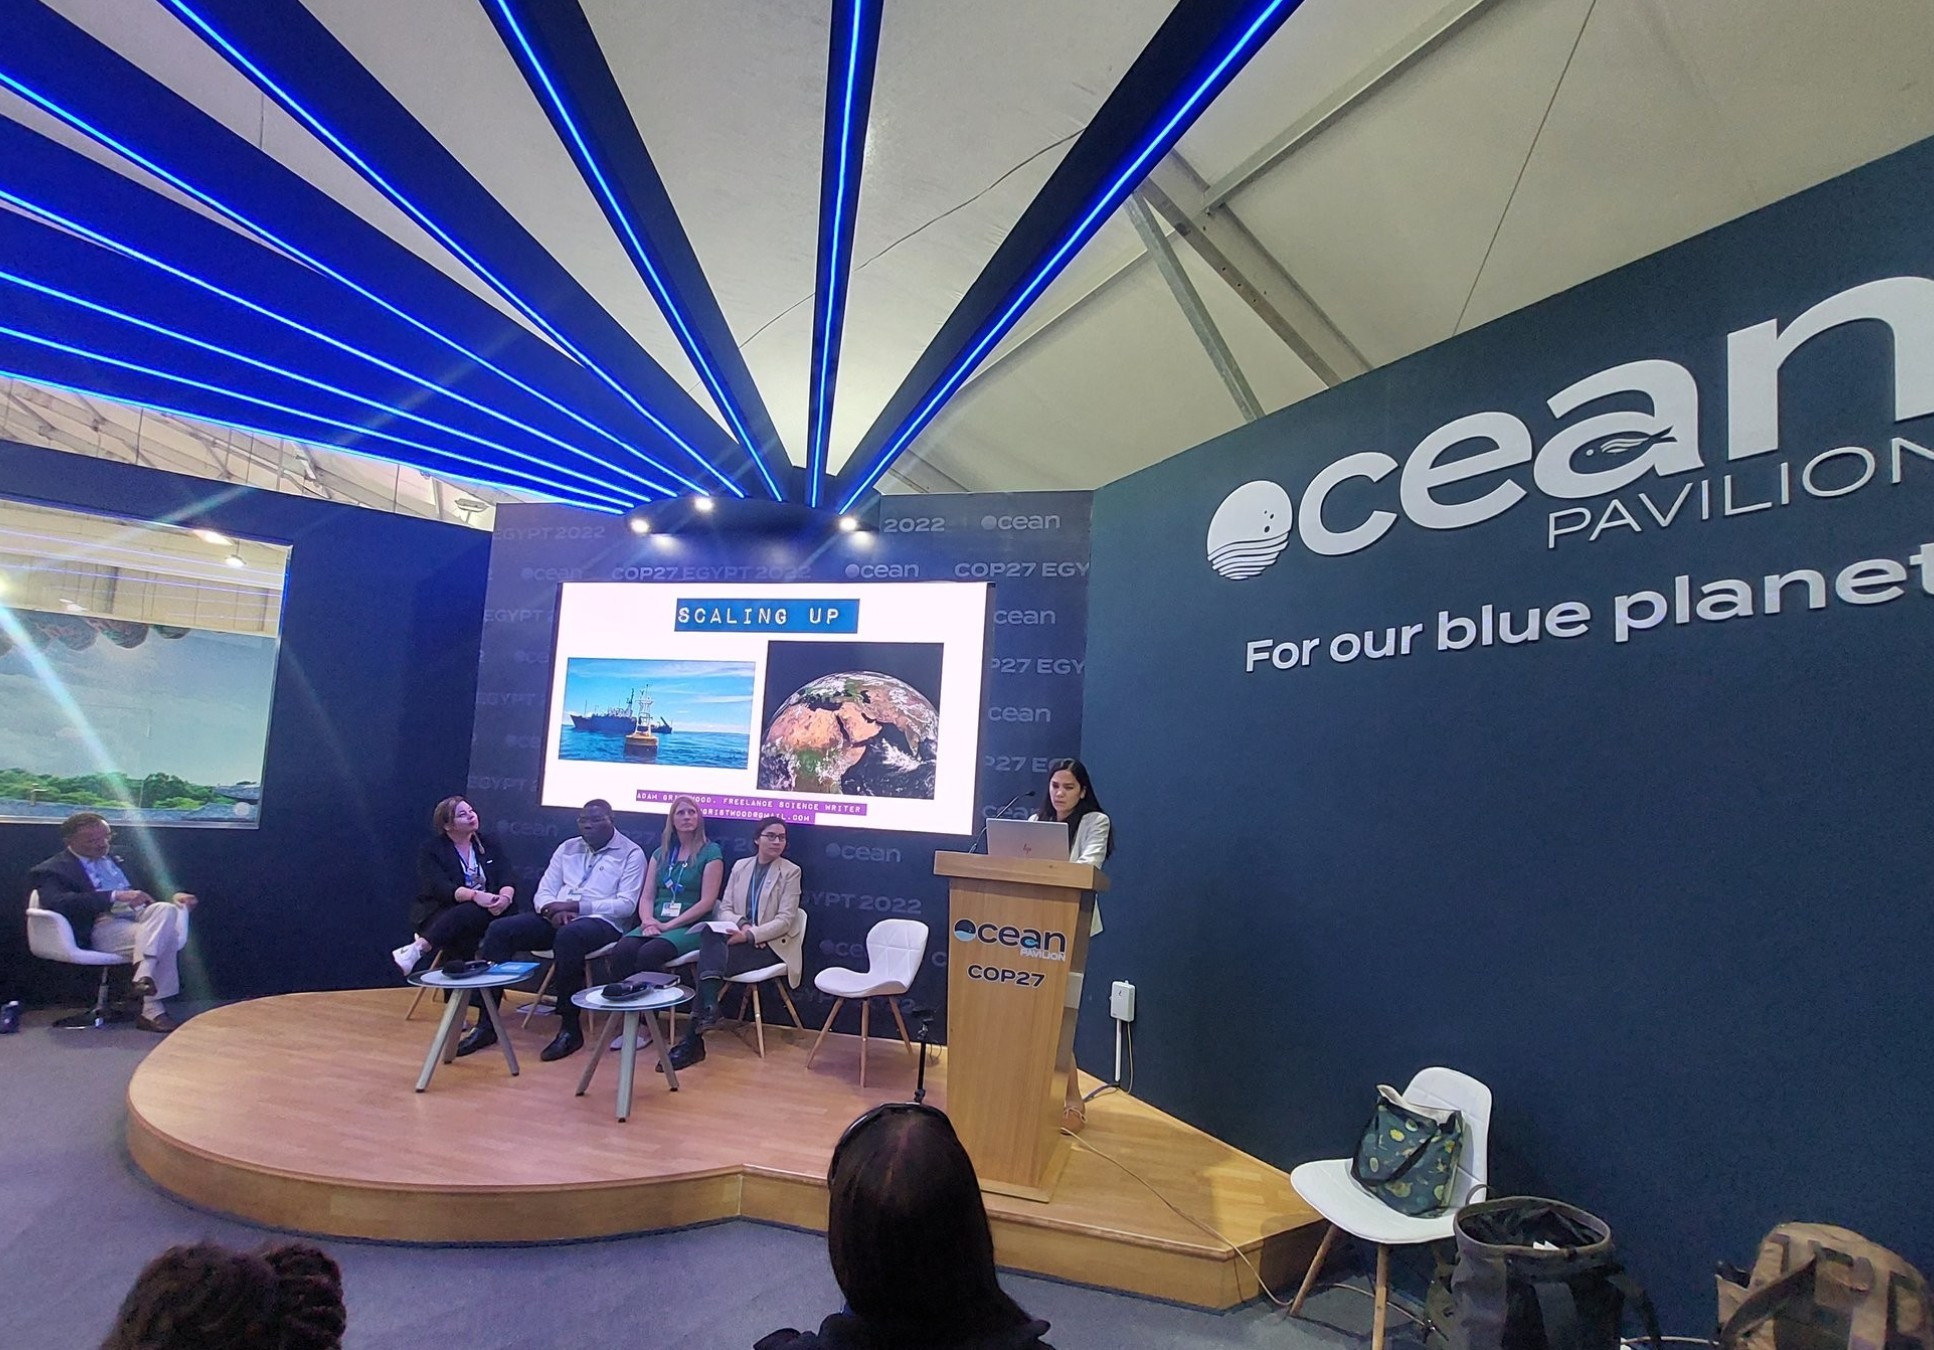 Photo shows a room with a stage, people are giving a presentation, the sign on the wall reads: Ocean Pavillion, For our blue planet